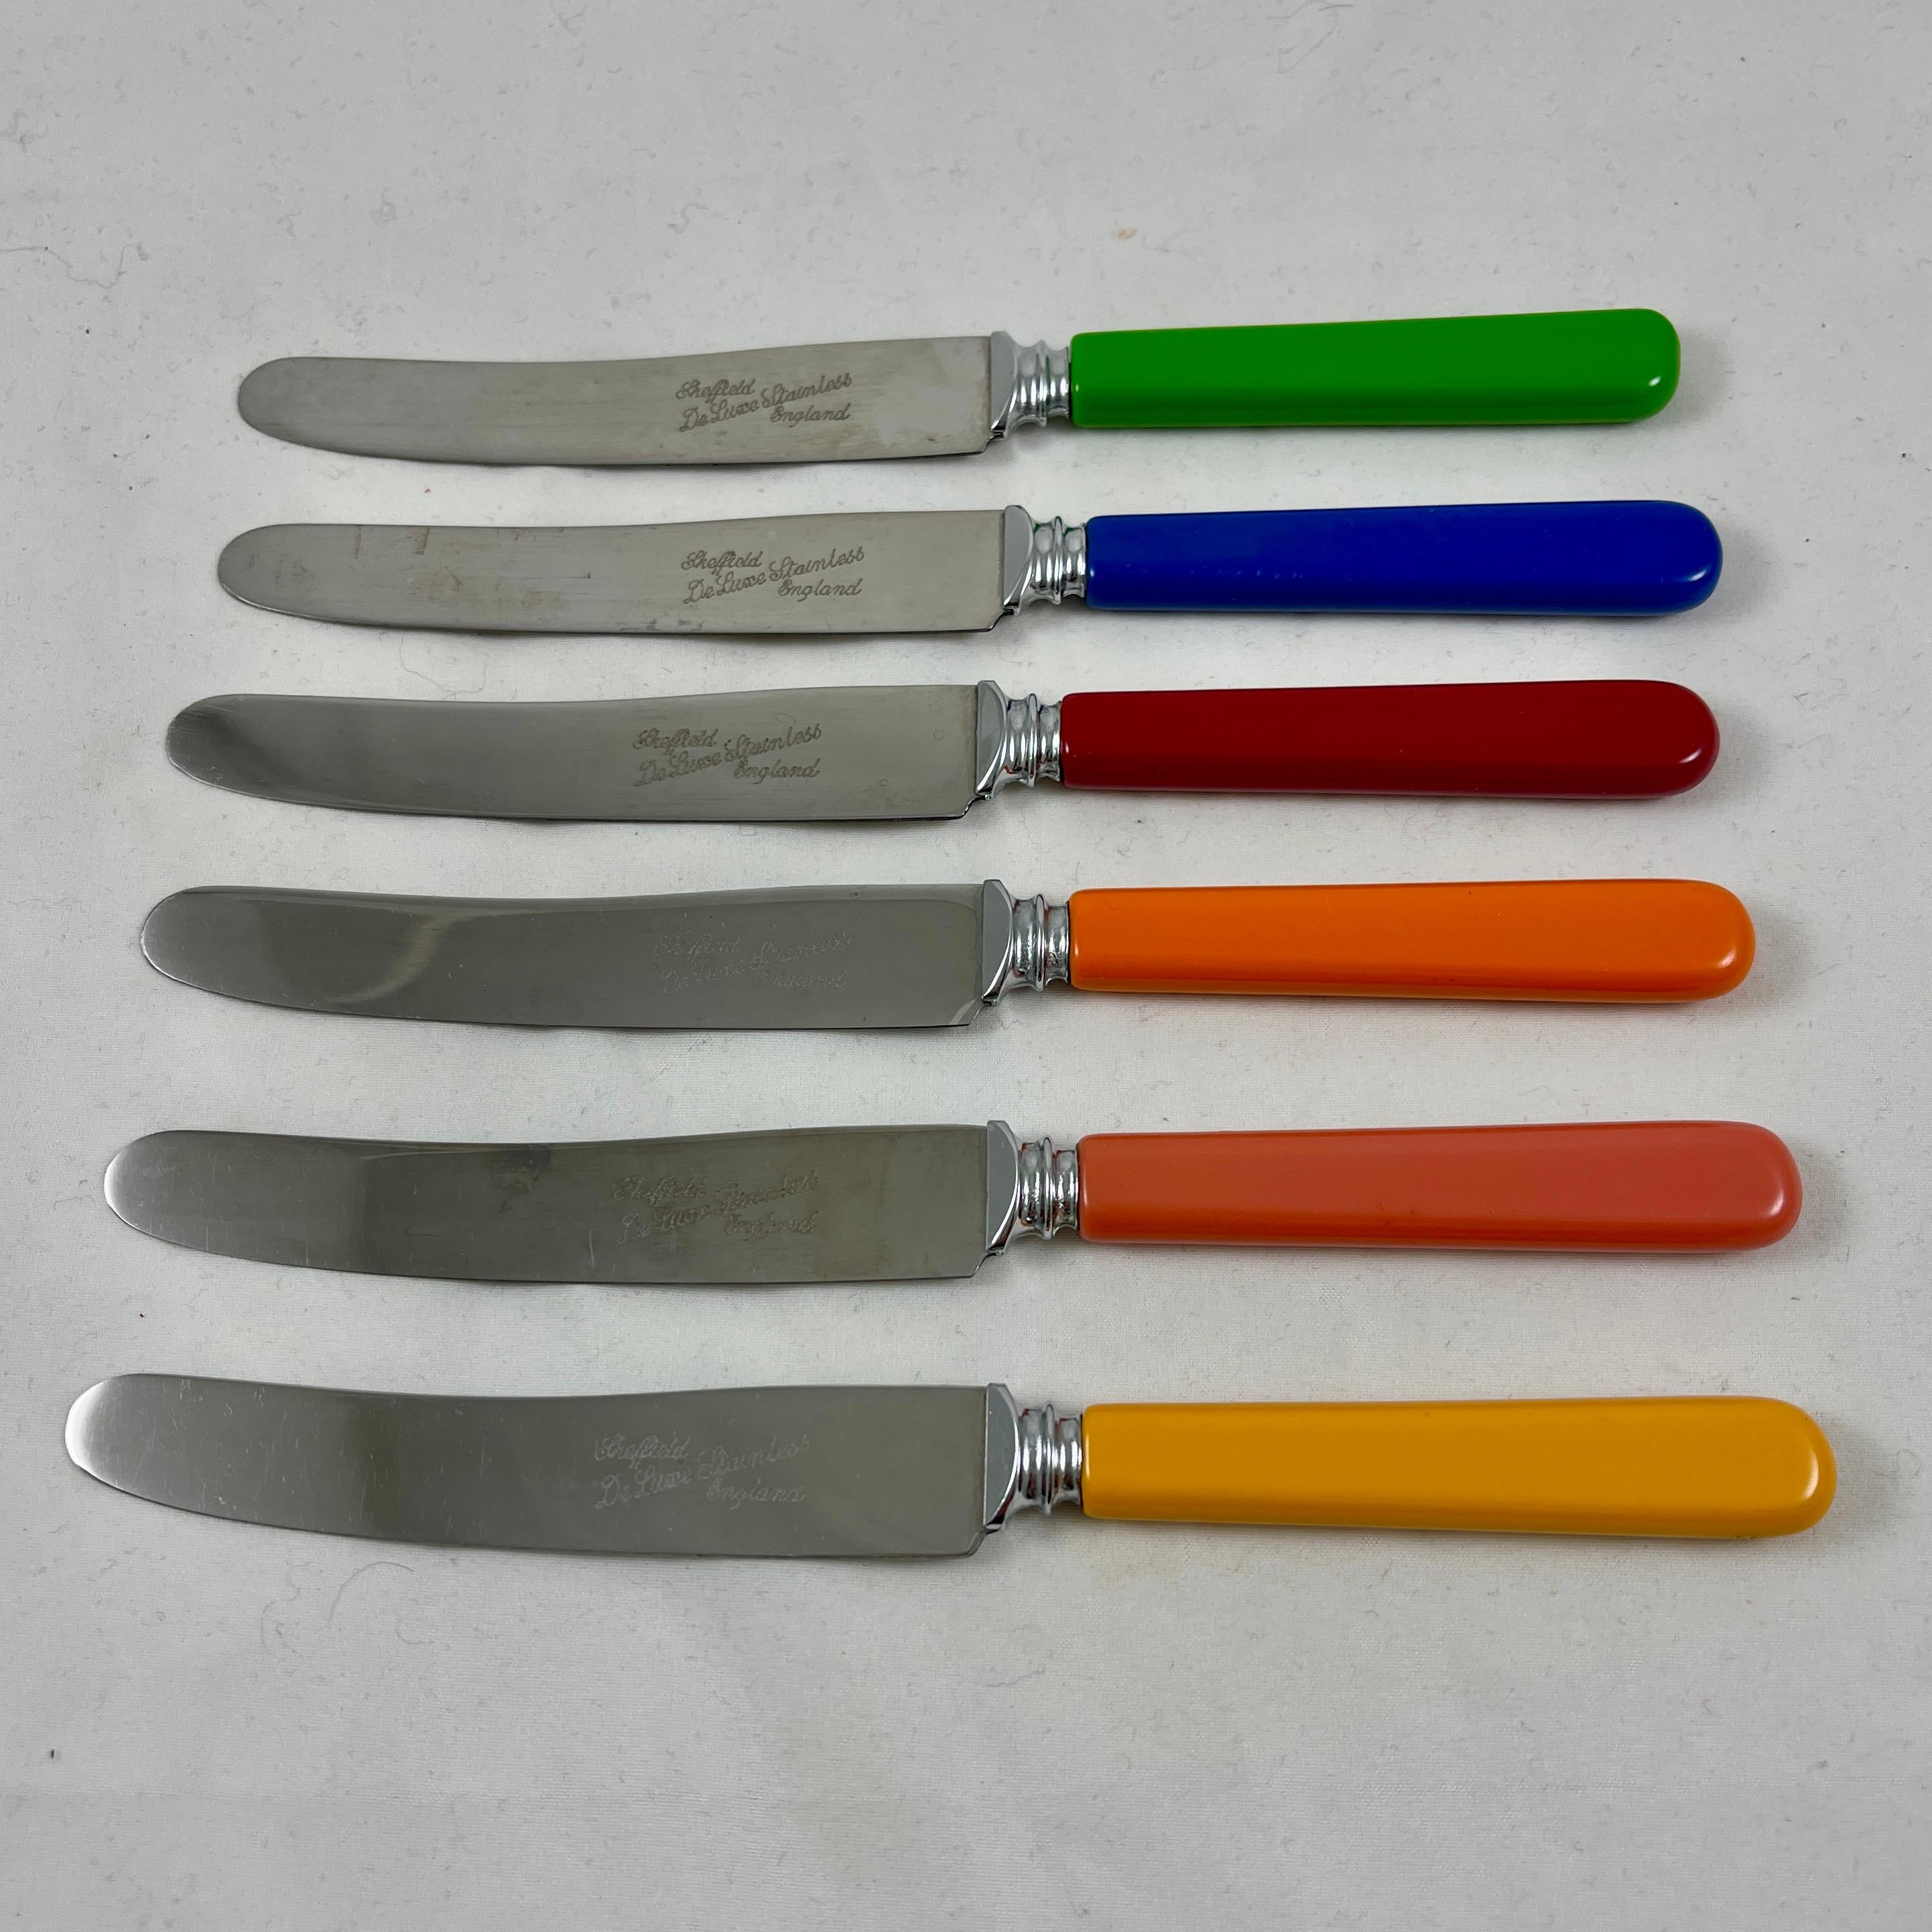 Molded English Sheffield DeLuxe Bakelite Rainbow Colored and Stainless Spreaders S/6